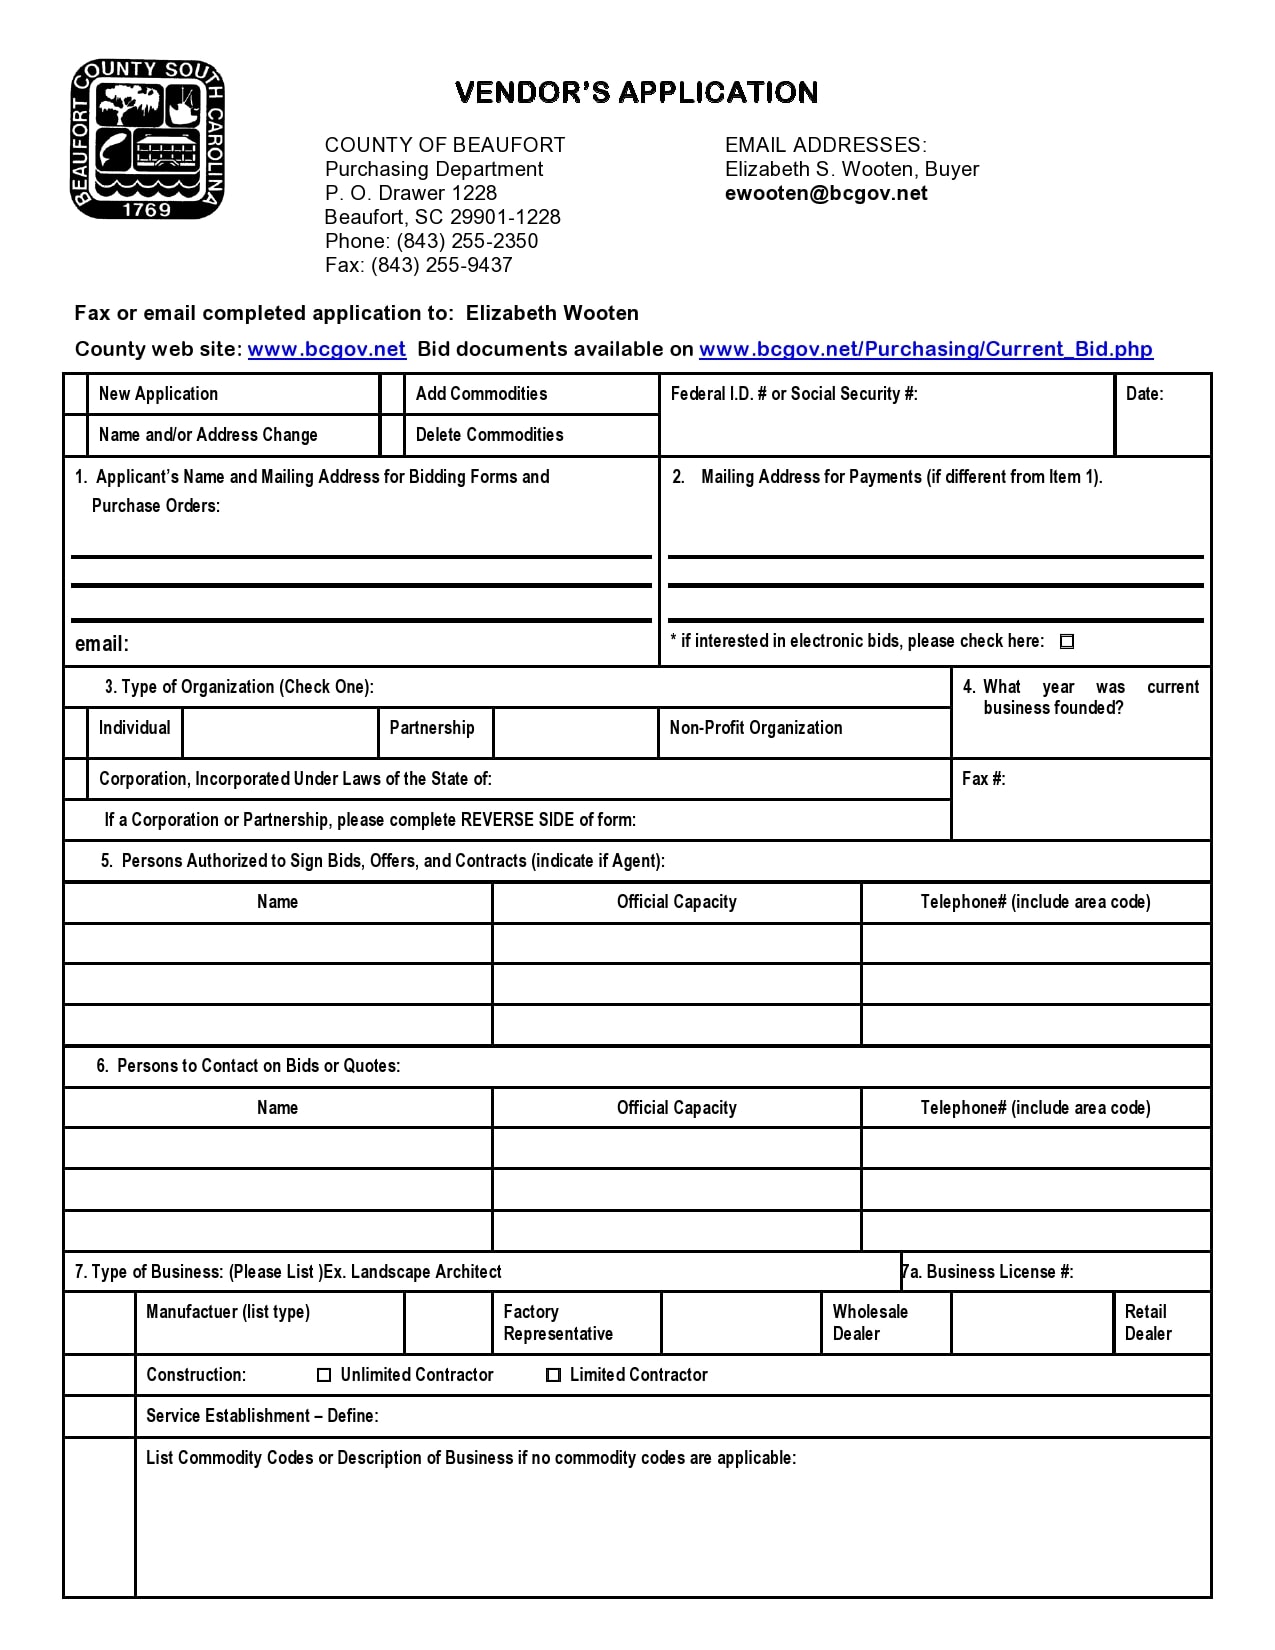 application forms